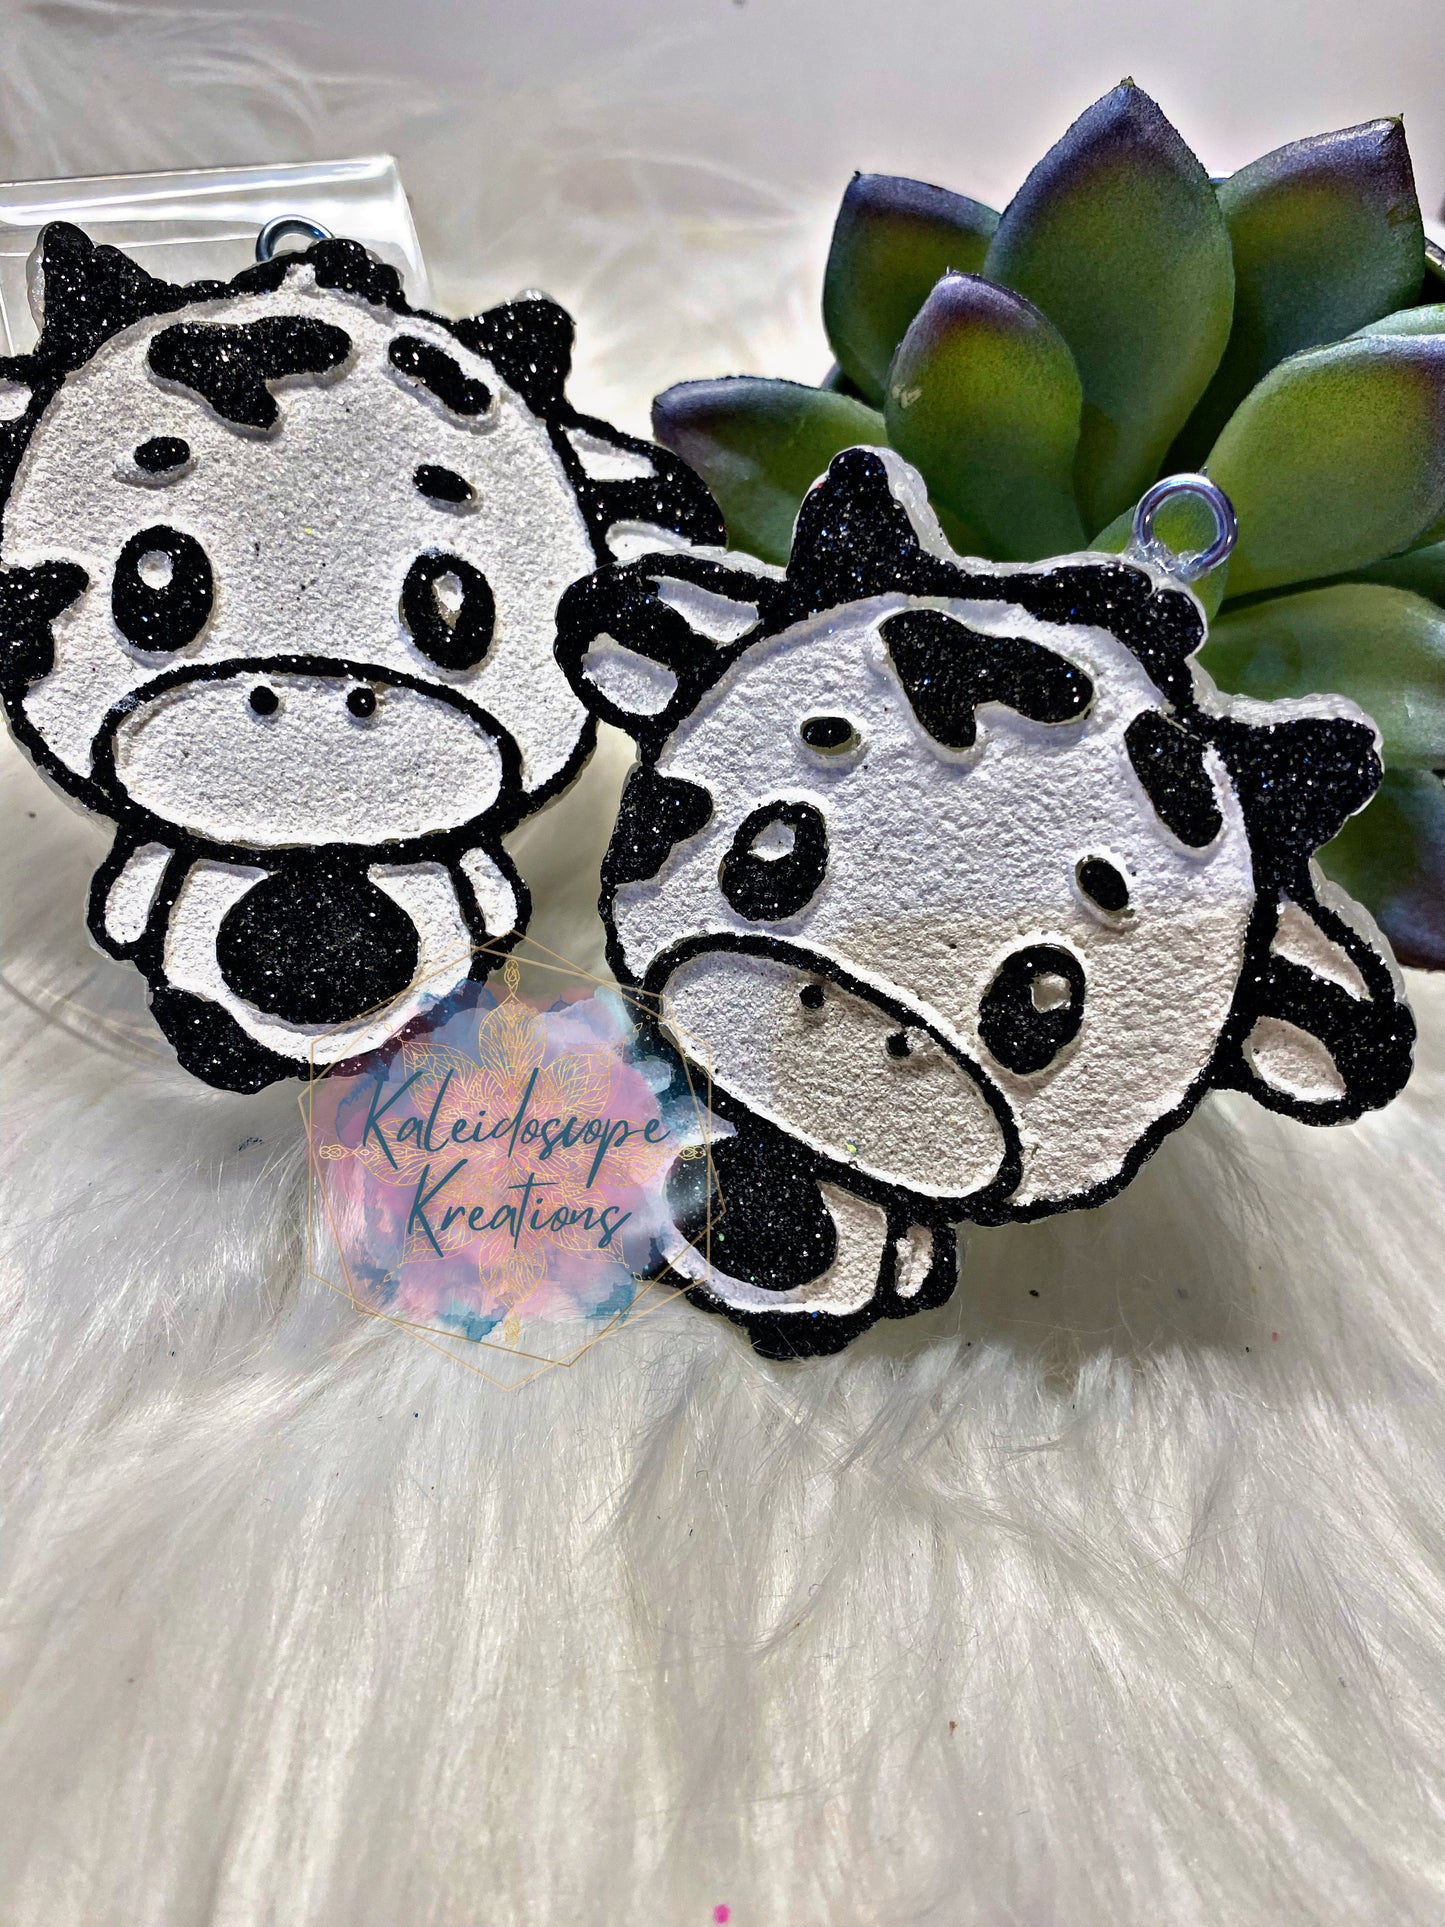 Cute Baby Cows Vent Clip Fresheners